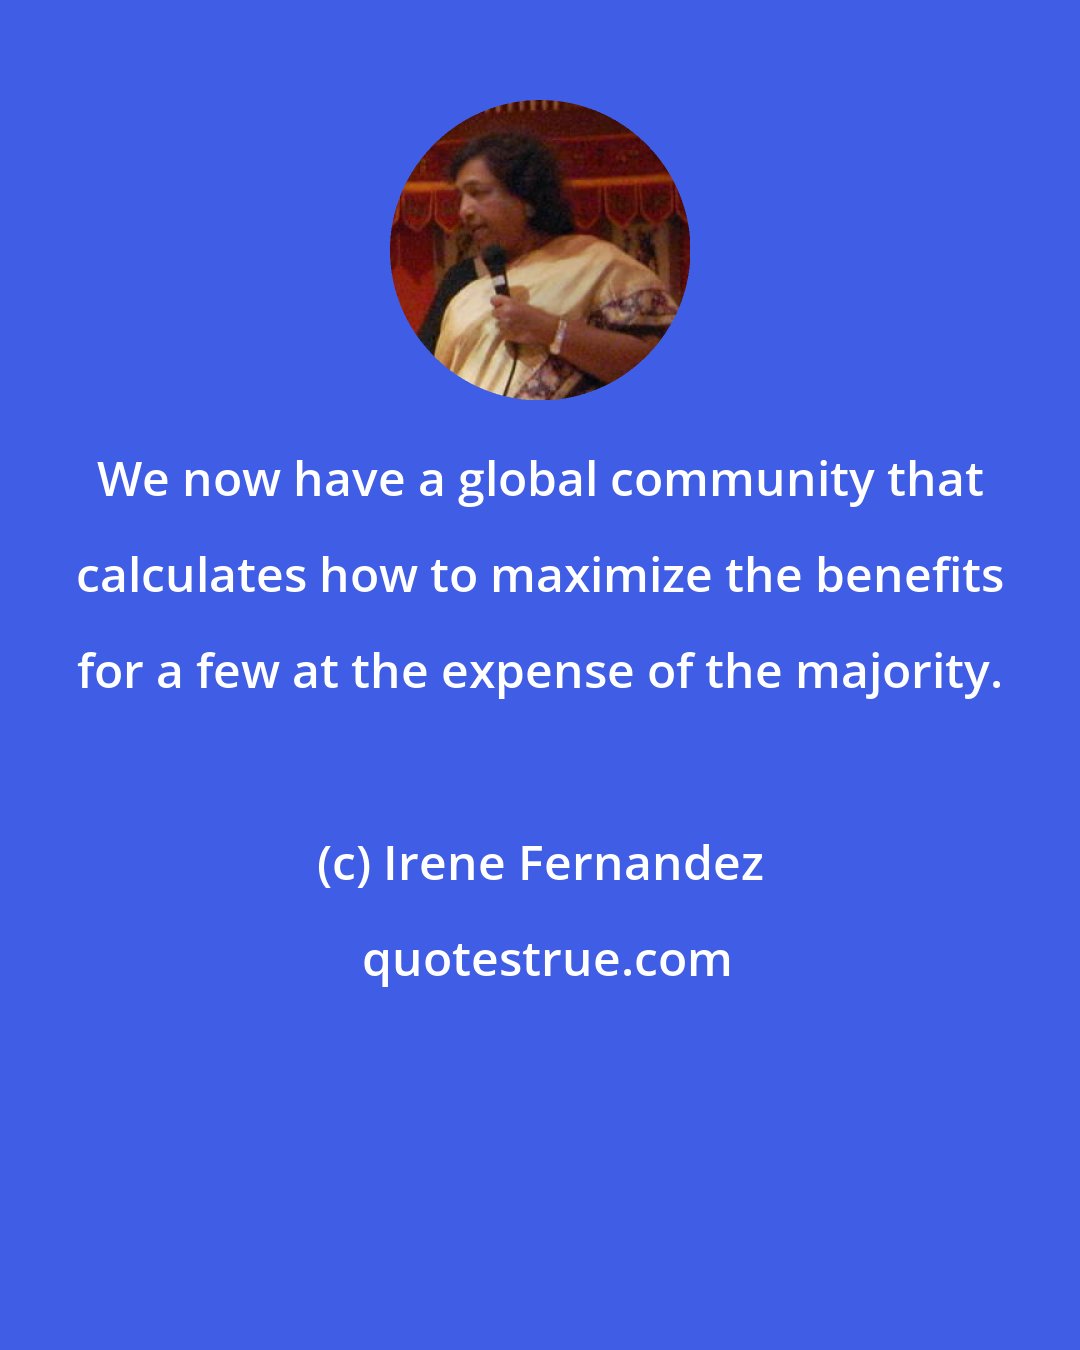 Irene Fernandez: We now have a global community that calculates how to maximize the benefits for a few at the expense of the majority.